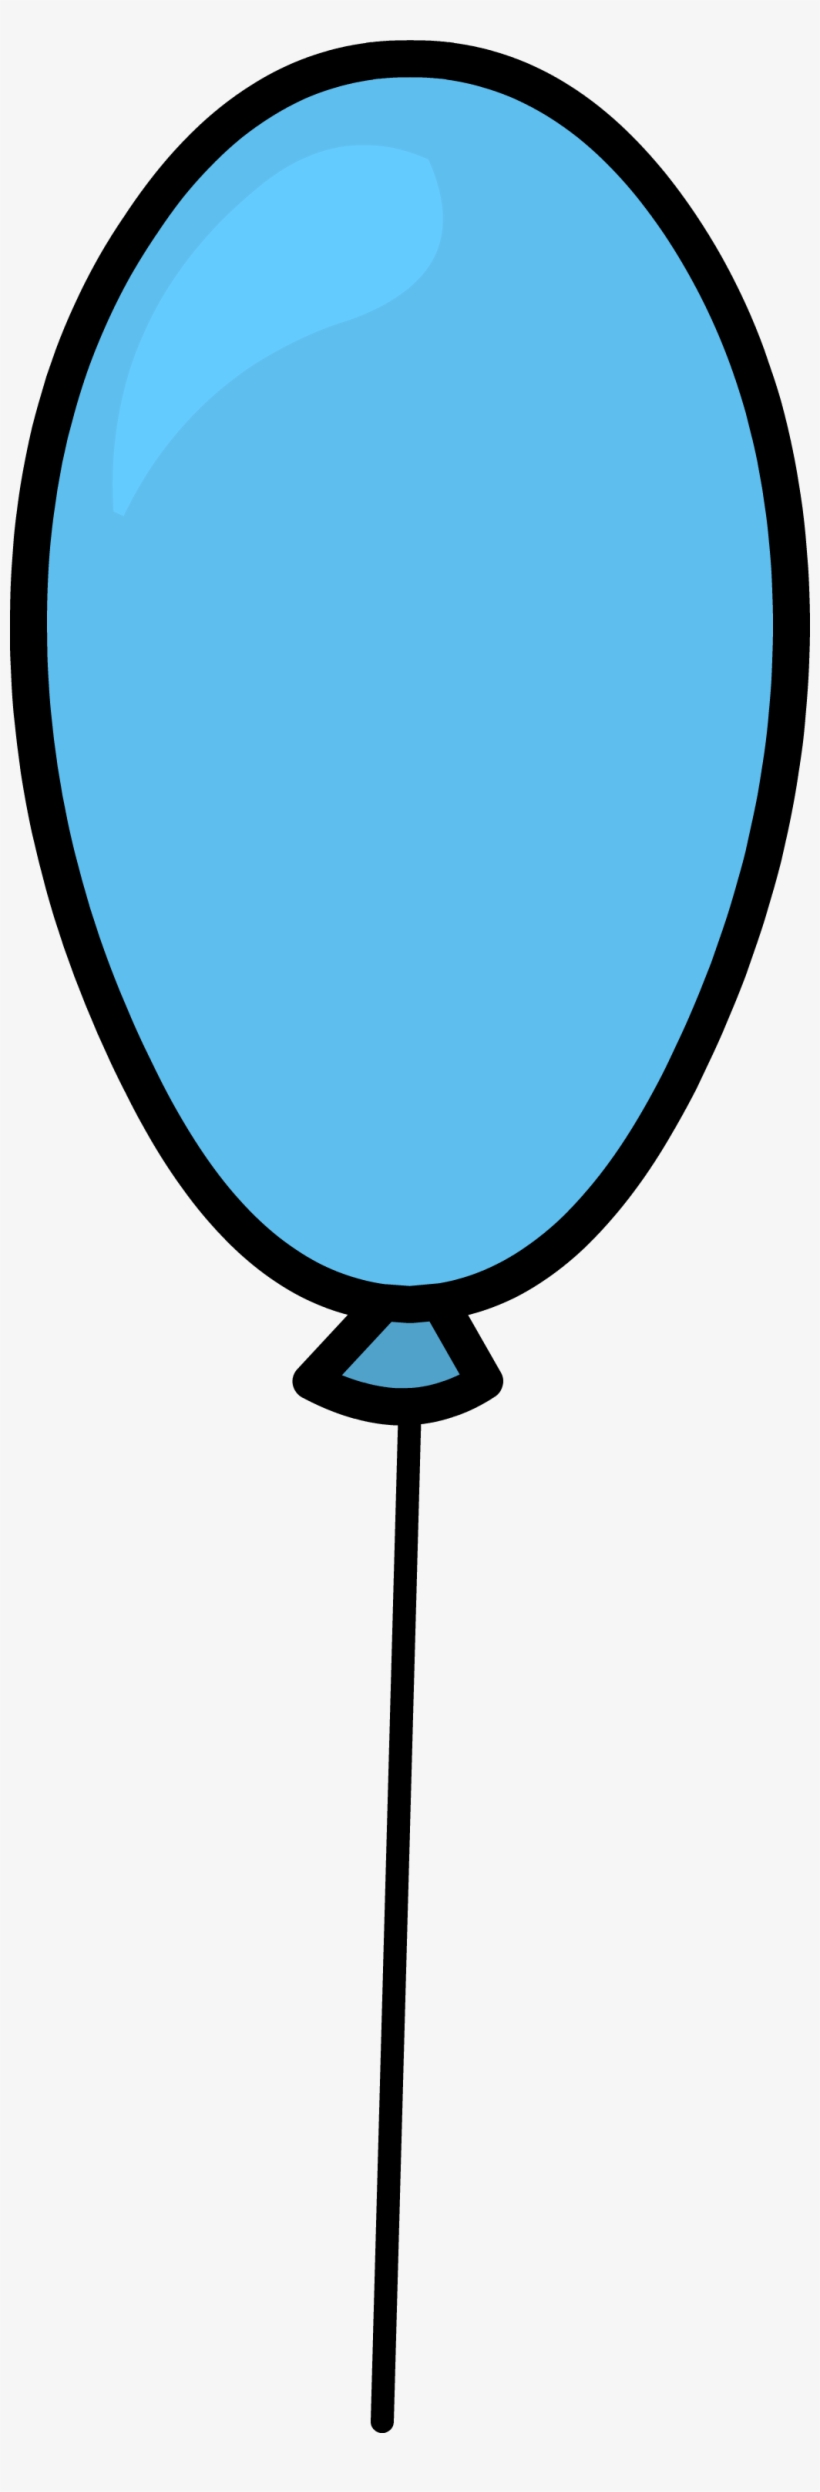 Blue Balloon Sprite 004 - Electrical Safety Tips, transparent png #870951